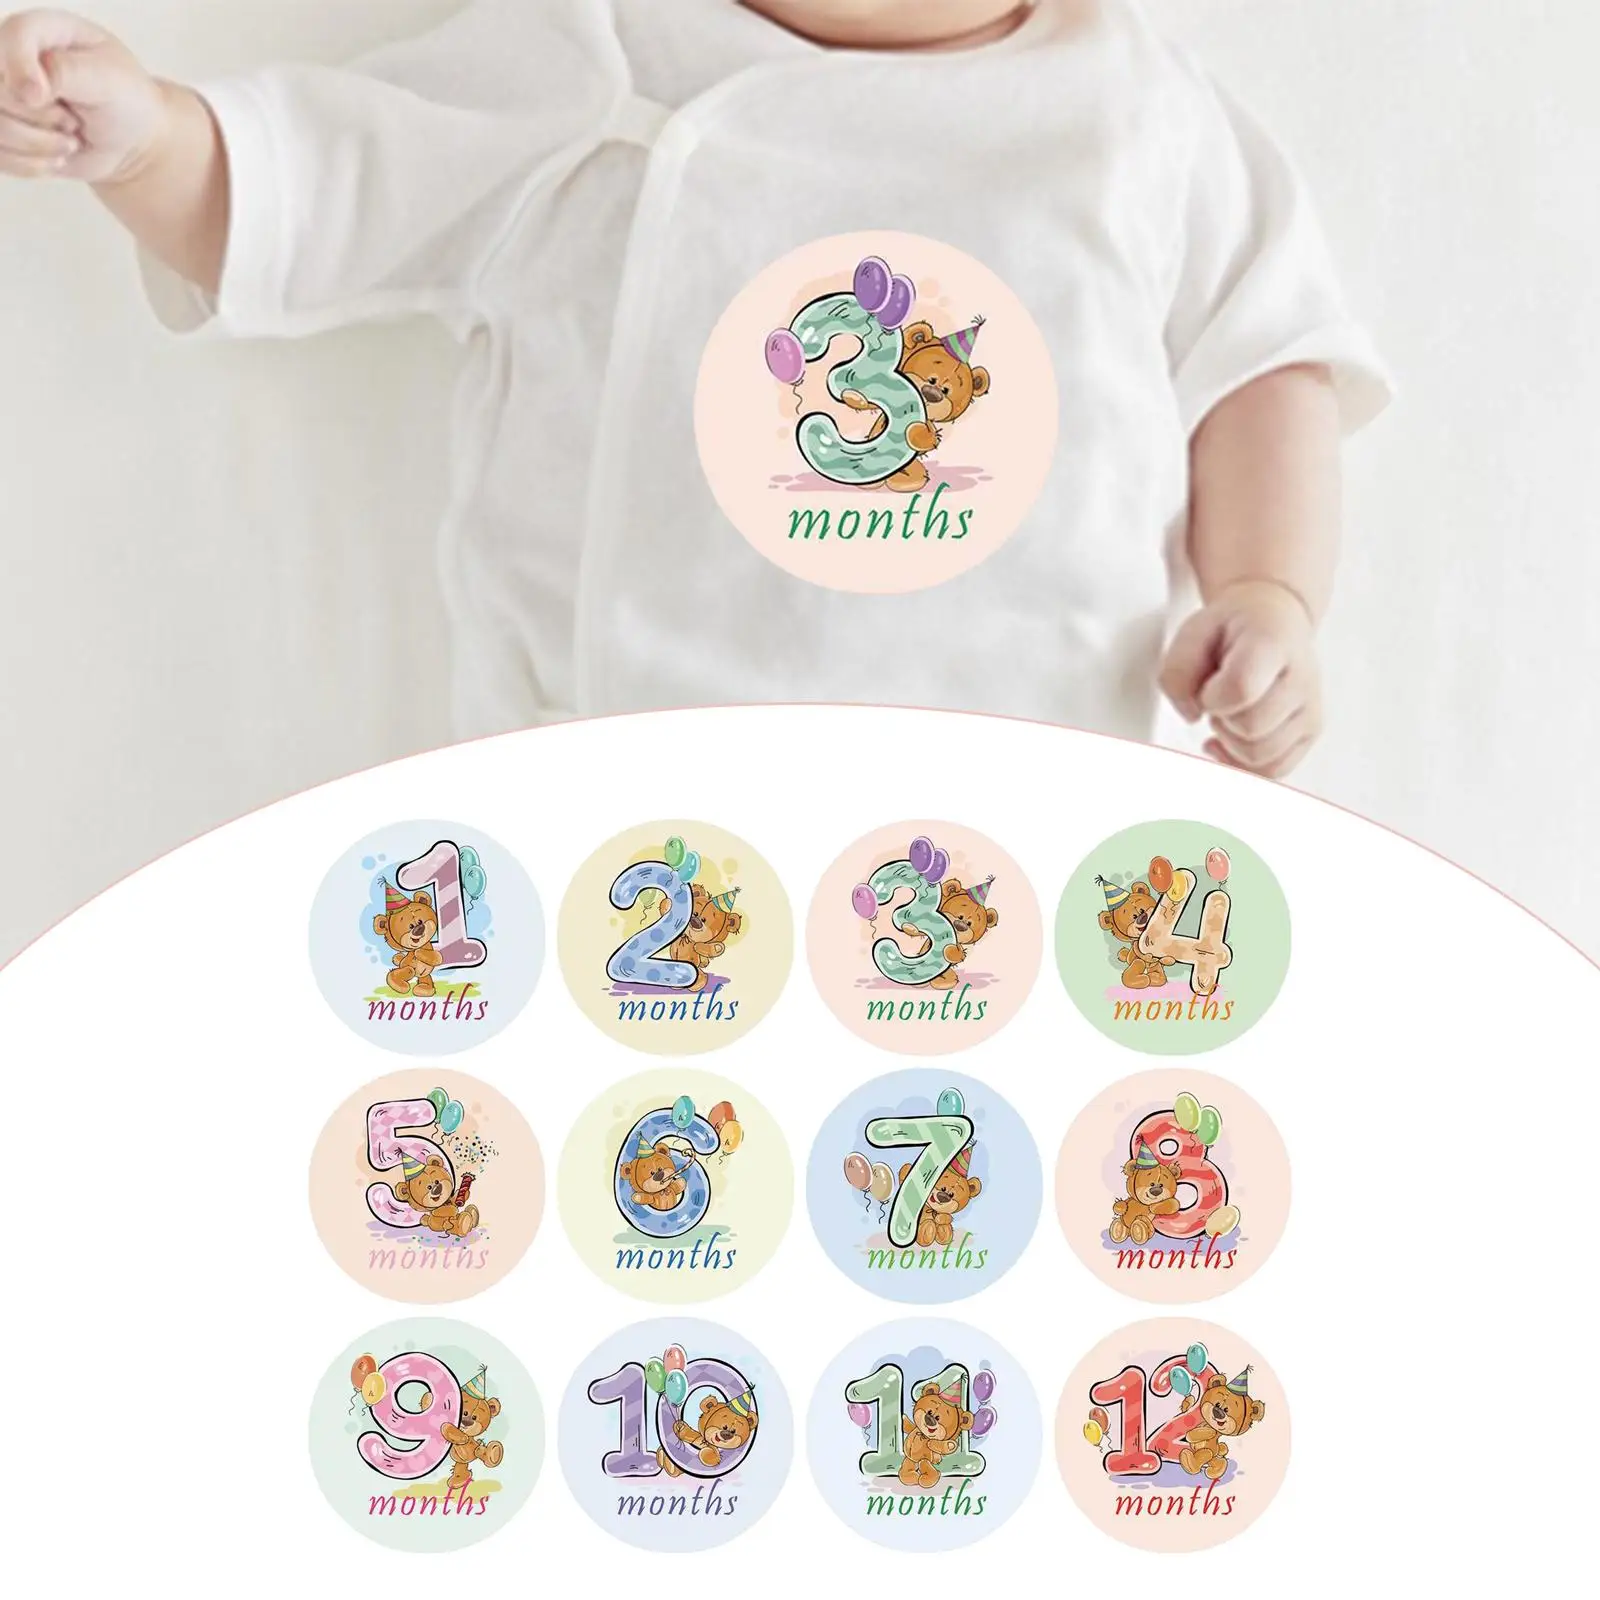 12Pcs Baby Monthly Stickers Baby Milestone Stickers Unisex Baby Month Stickers Memories Photo Props Shower Gift 1-12 Month